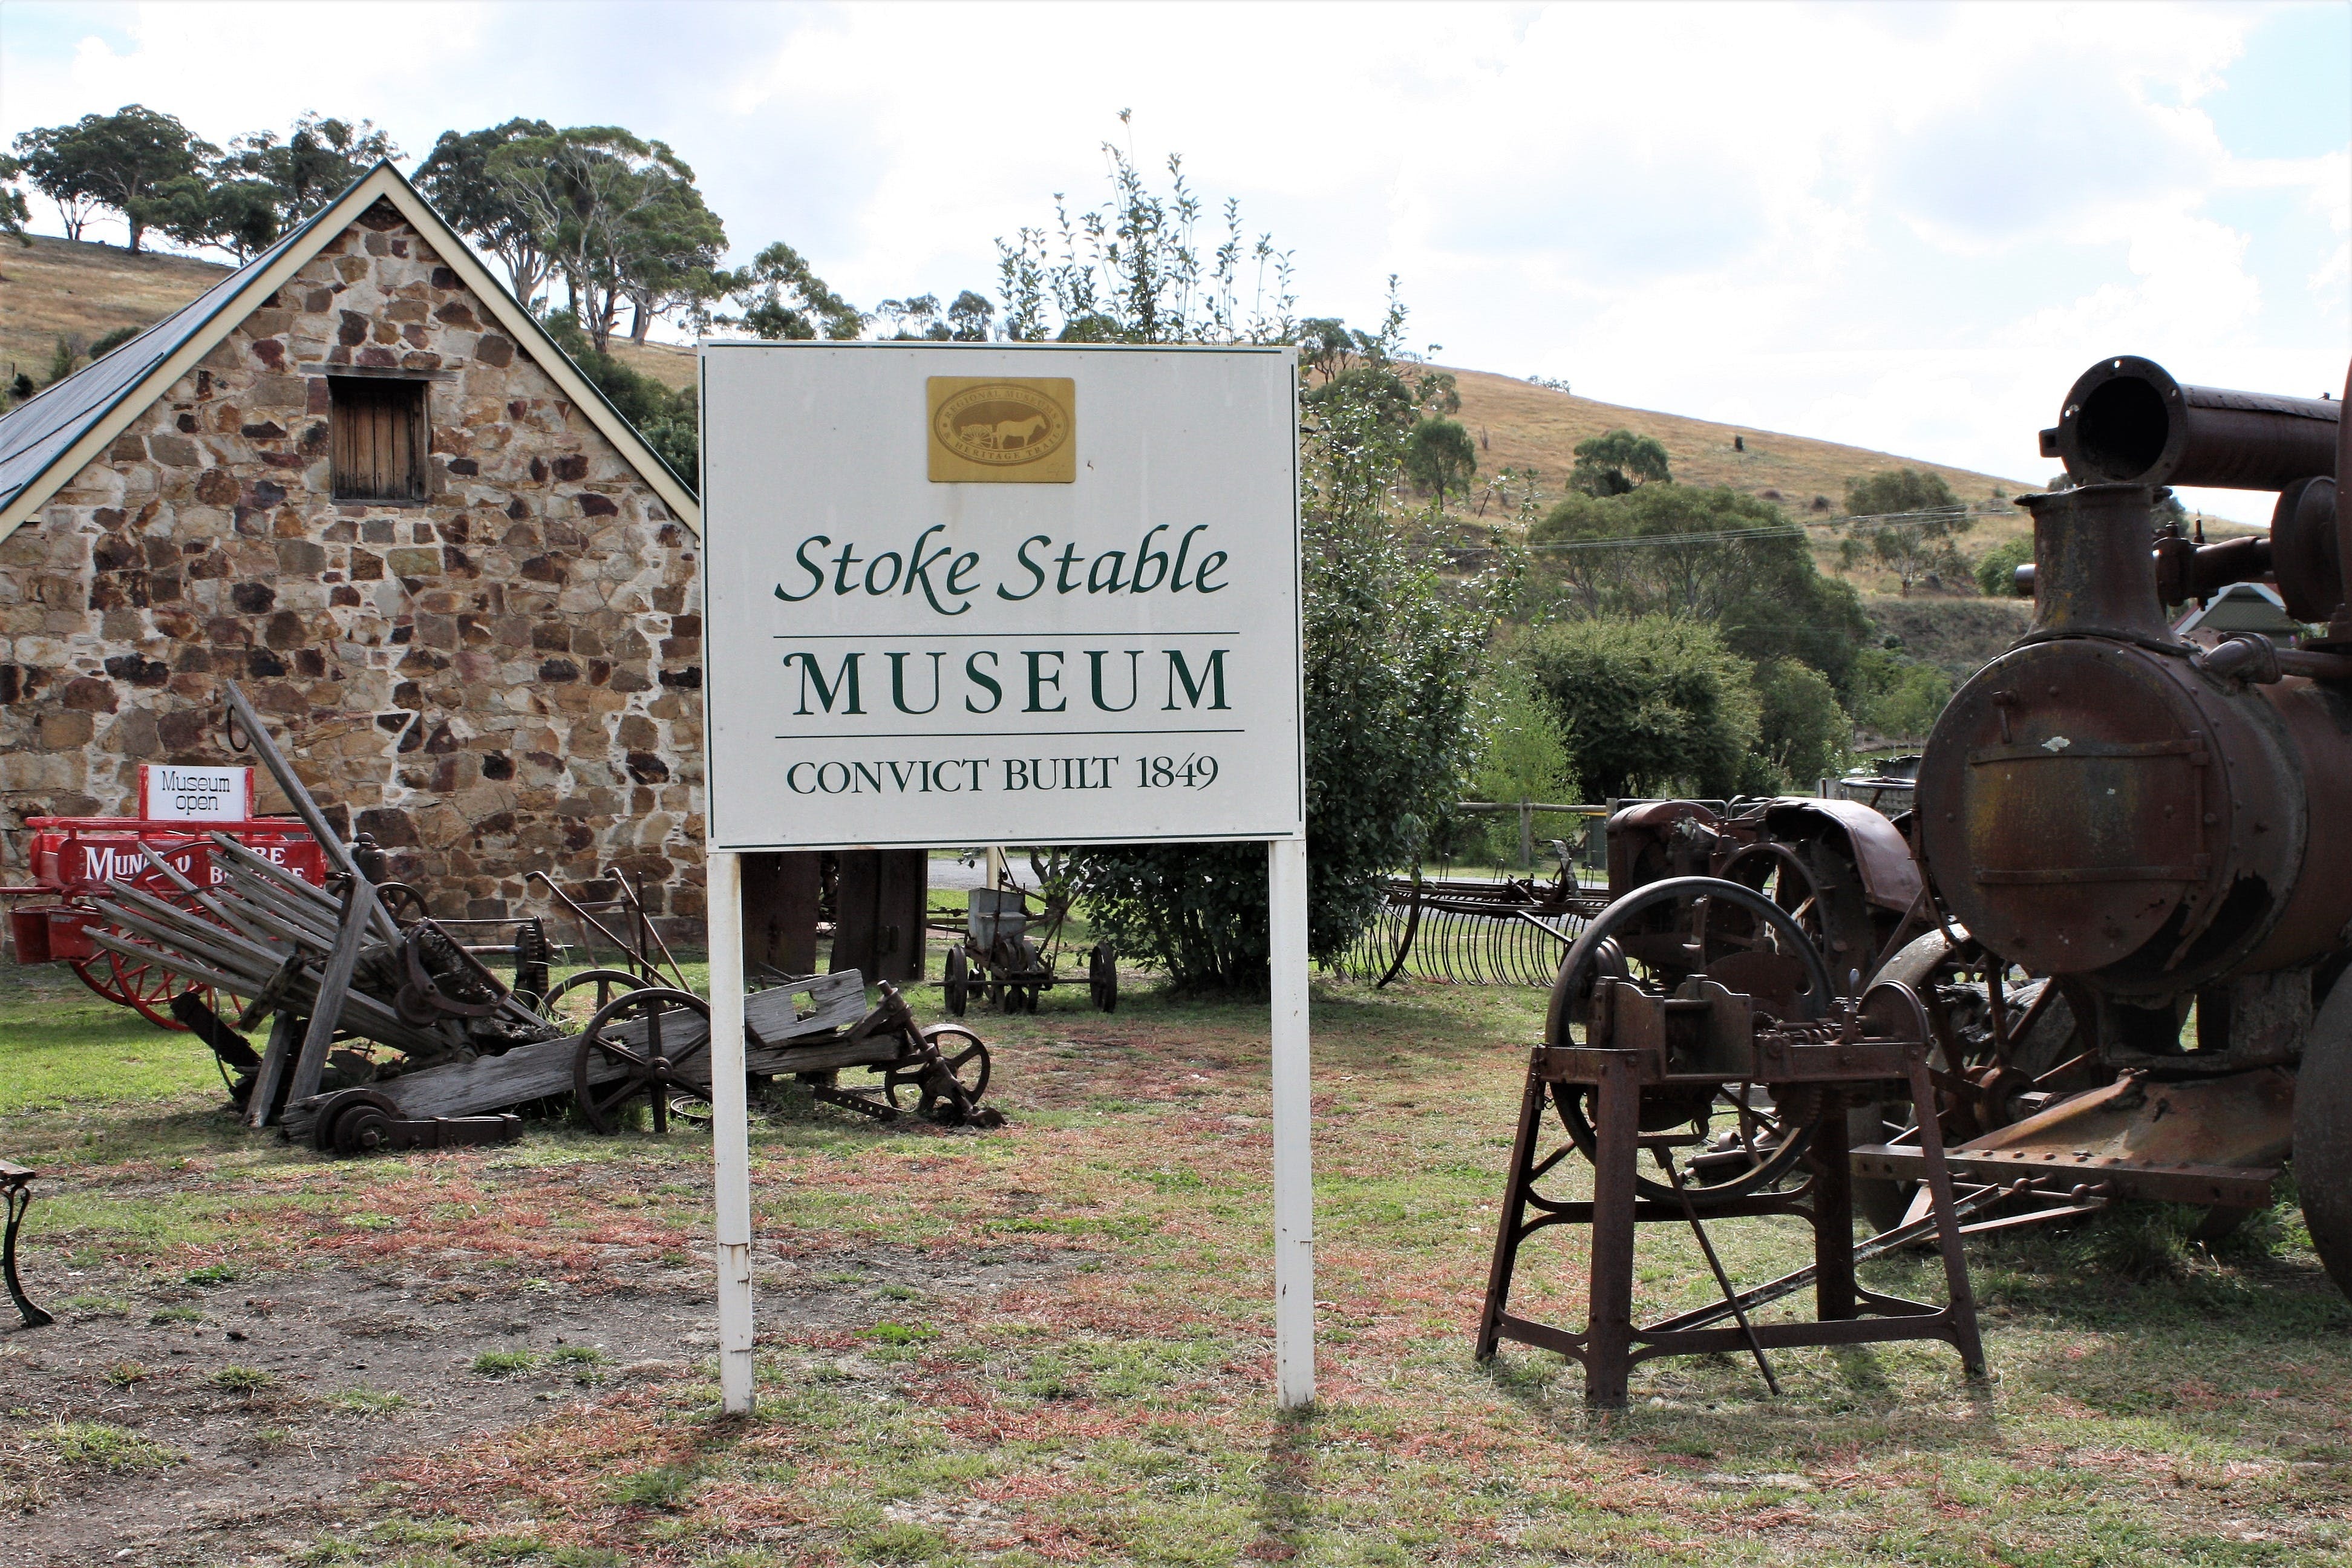 Stoke Stable Museum - Find Attractions